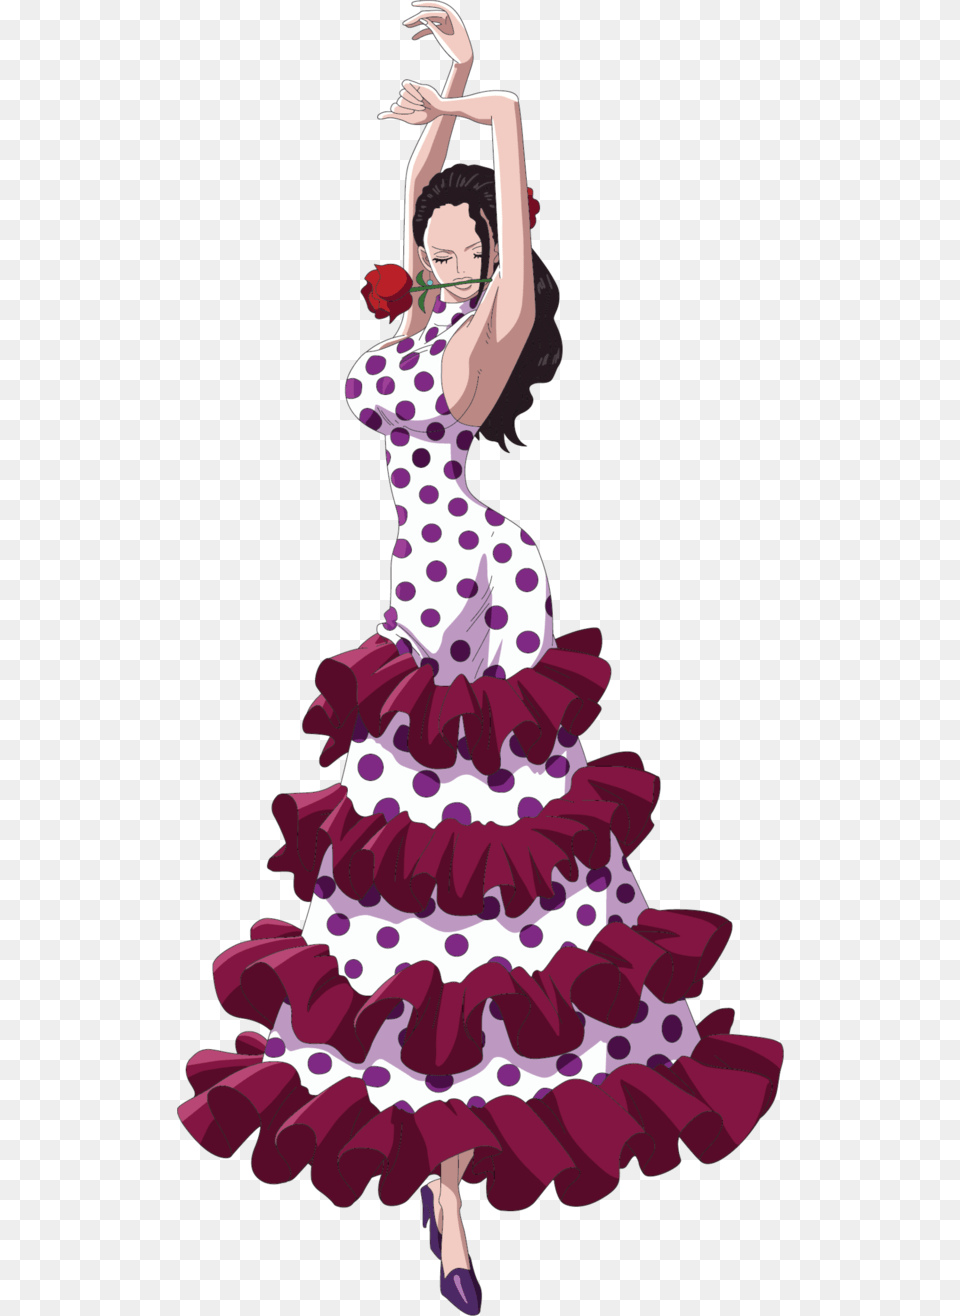 Anime One Piece Viola Vectortitle No Larger One Piece Viola Sexy, Dance Pose, Dancing, Flamenco, Leisure Activities Free Transparent Png